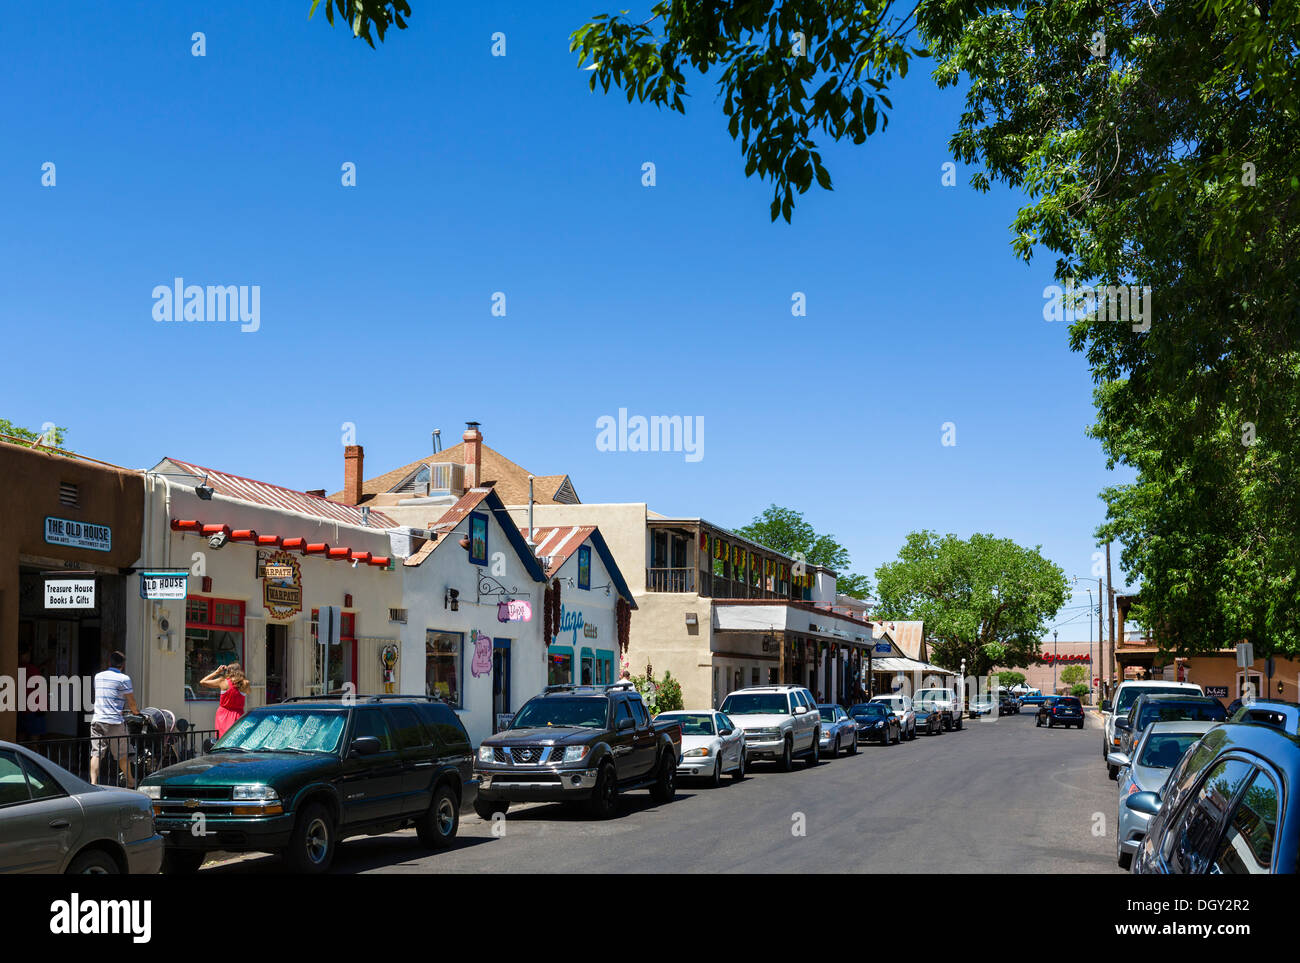 Shops on Old Town Plaza, Old Town, Albuquerque, New Mexico, USA Stock Photo